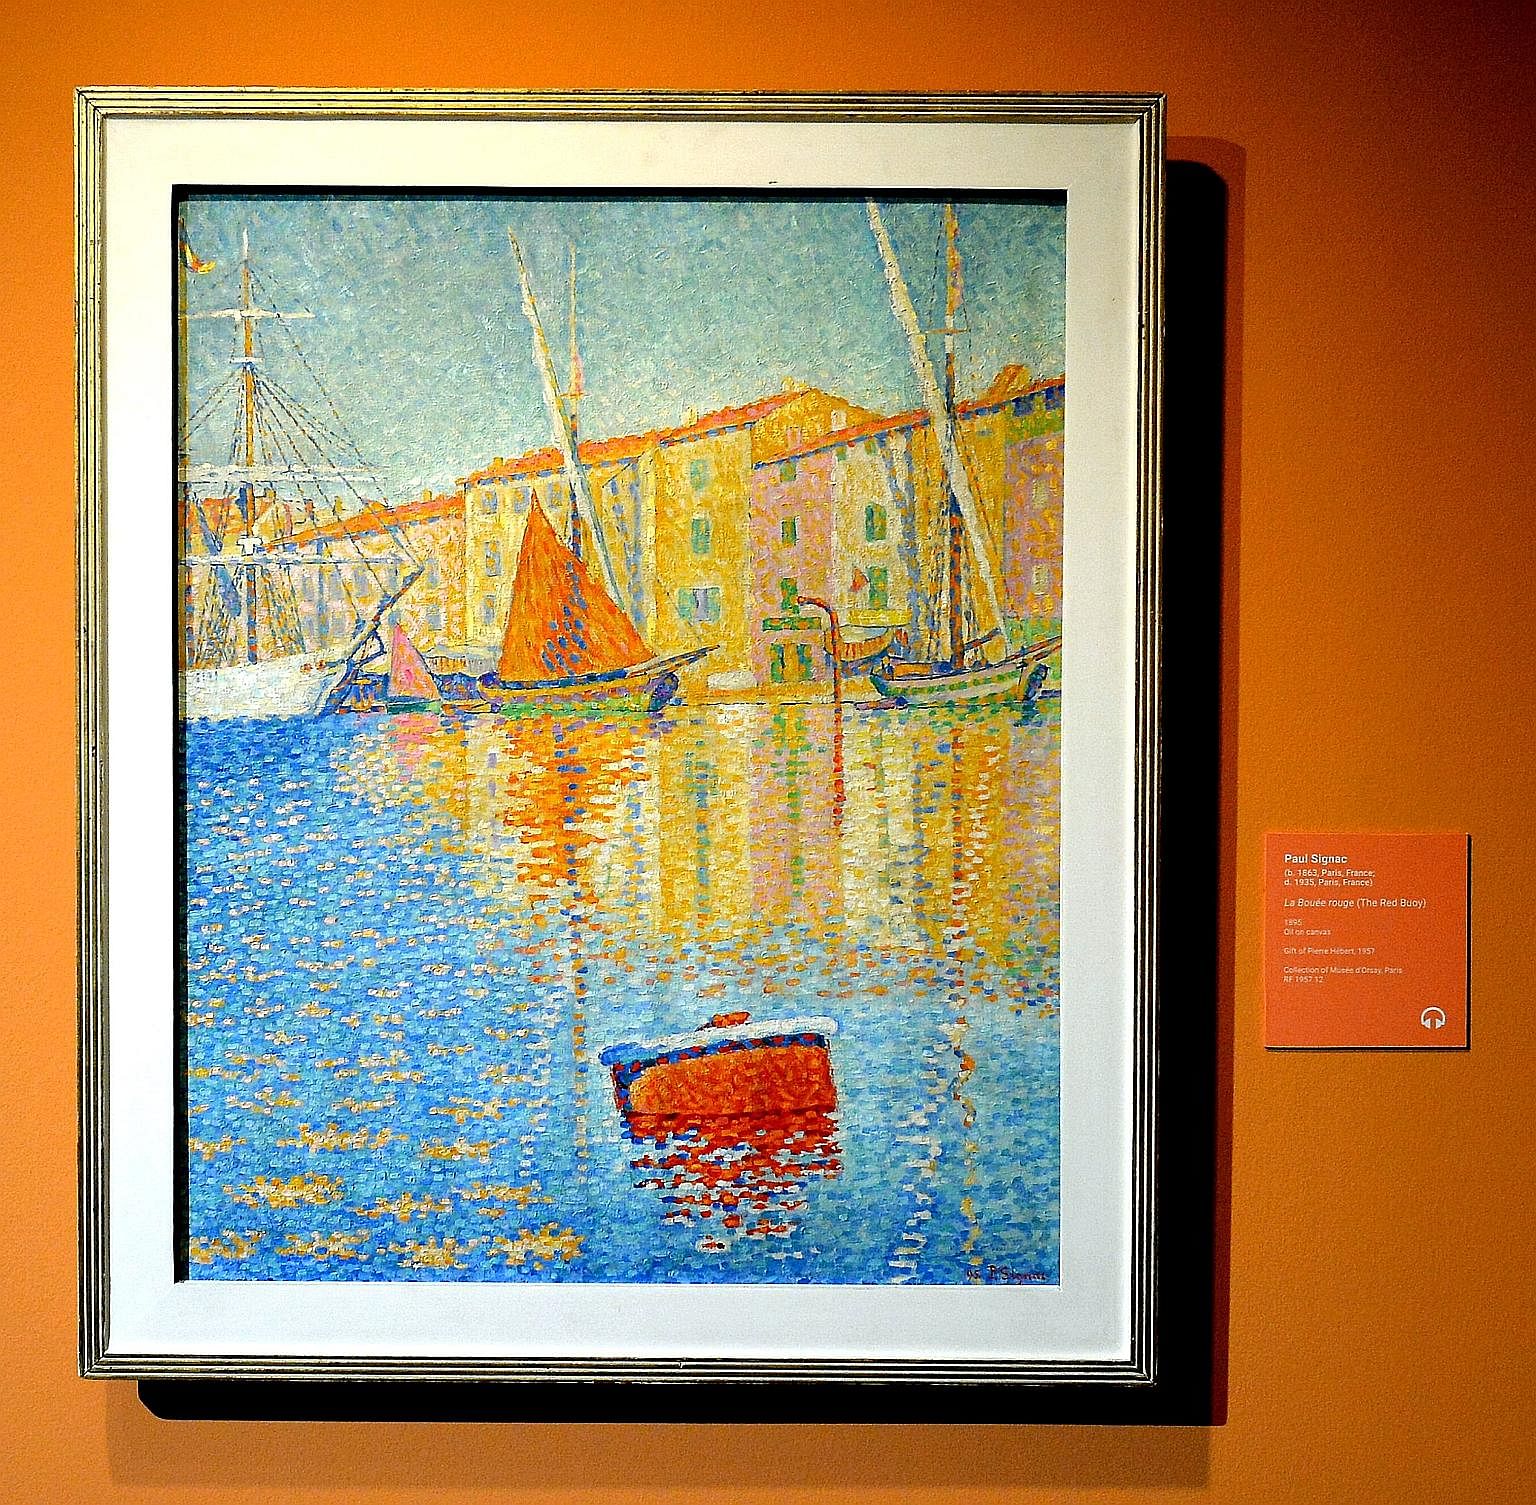 Among the artworks on display are Claude Monet's The Magpie (above) and Paul Signac's The Red Buoy (left).